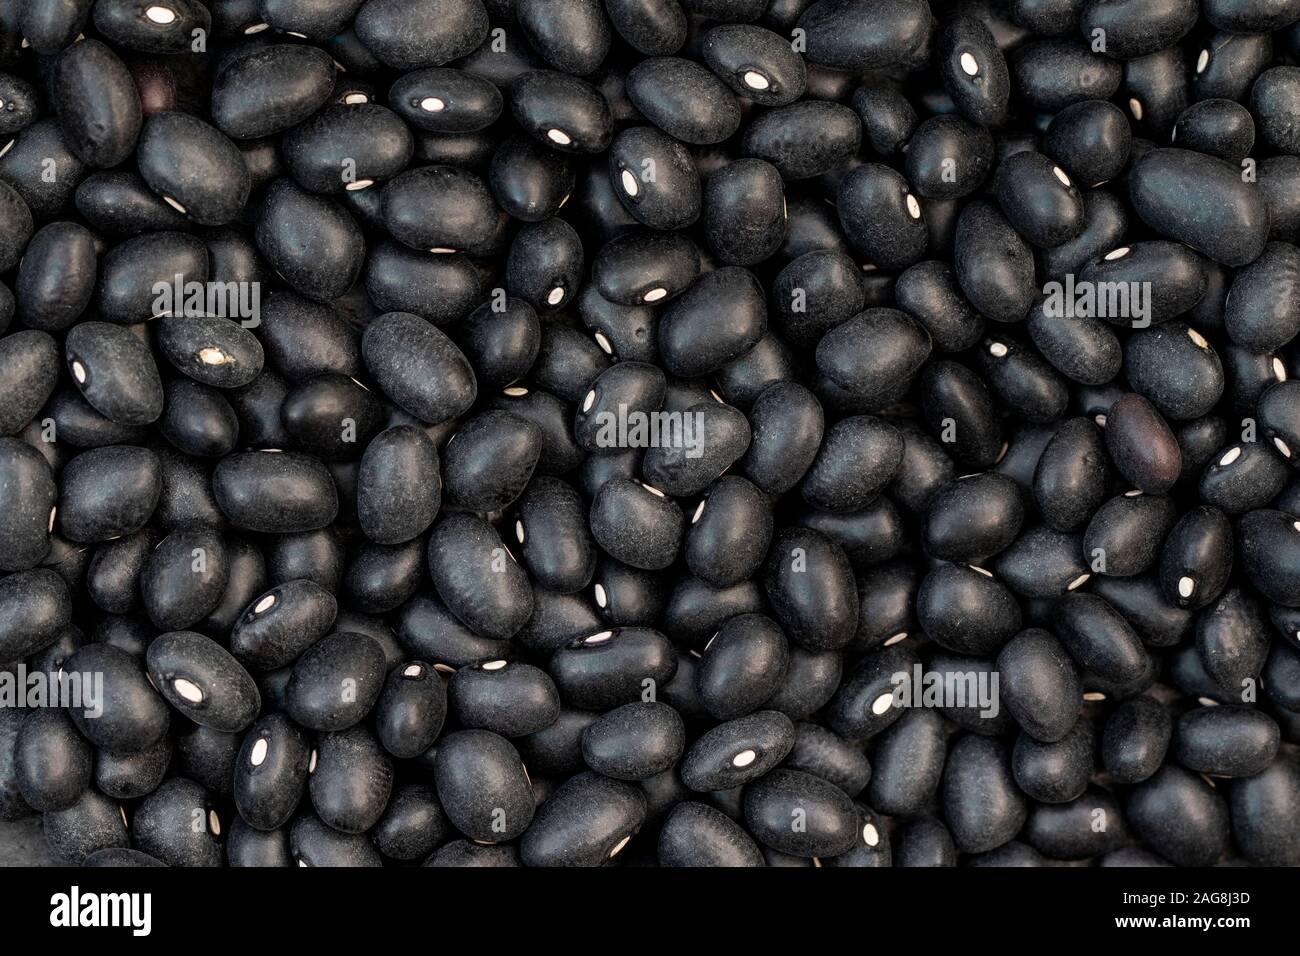 Close-up of black beans or Tolosa beans. Spain Stock Photo